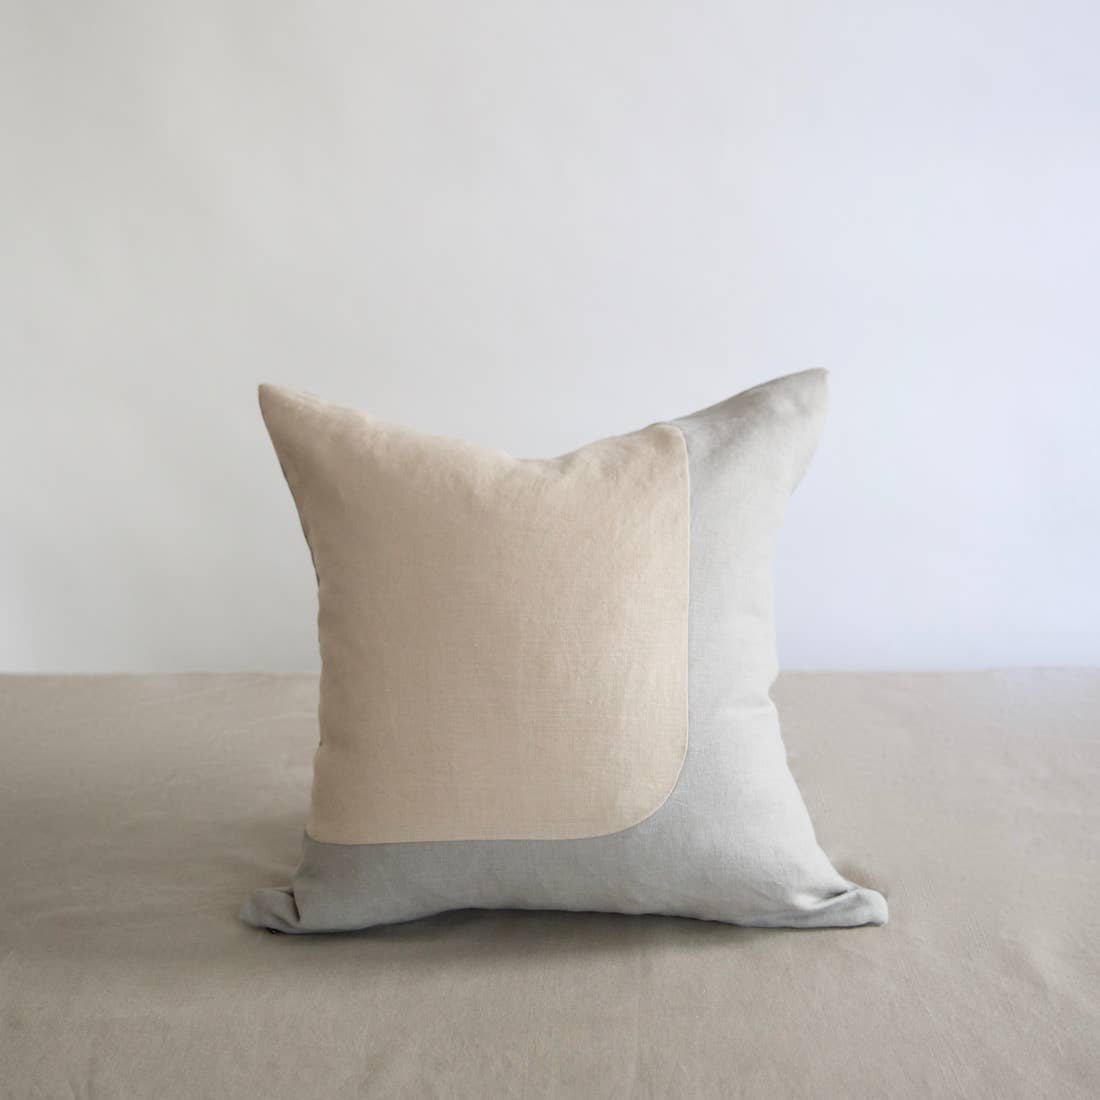 Eco-friendly Ethically Handmade Square Linen Accent Pillow